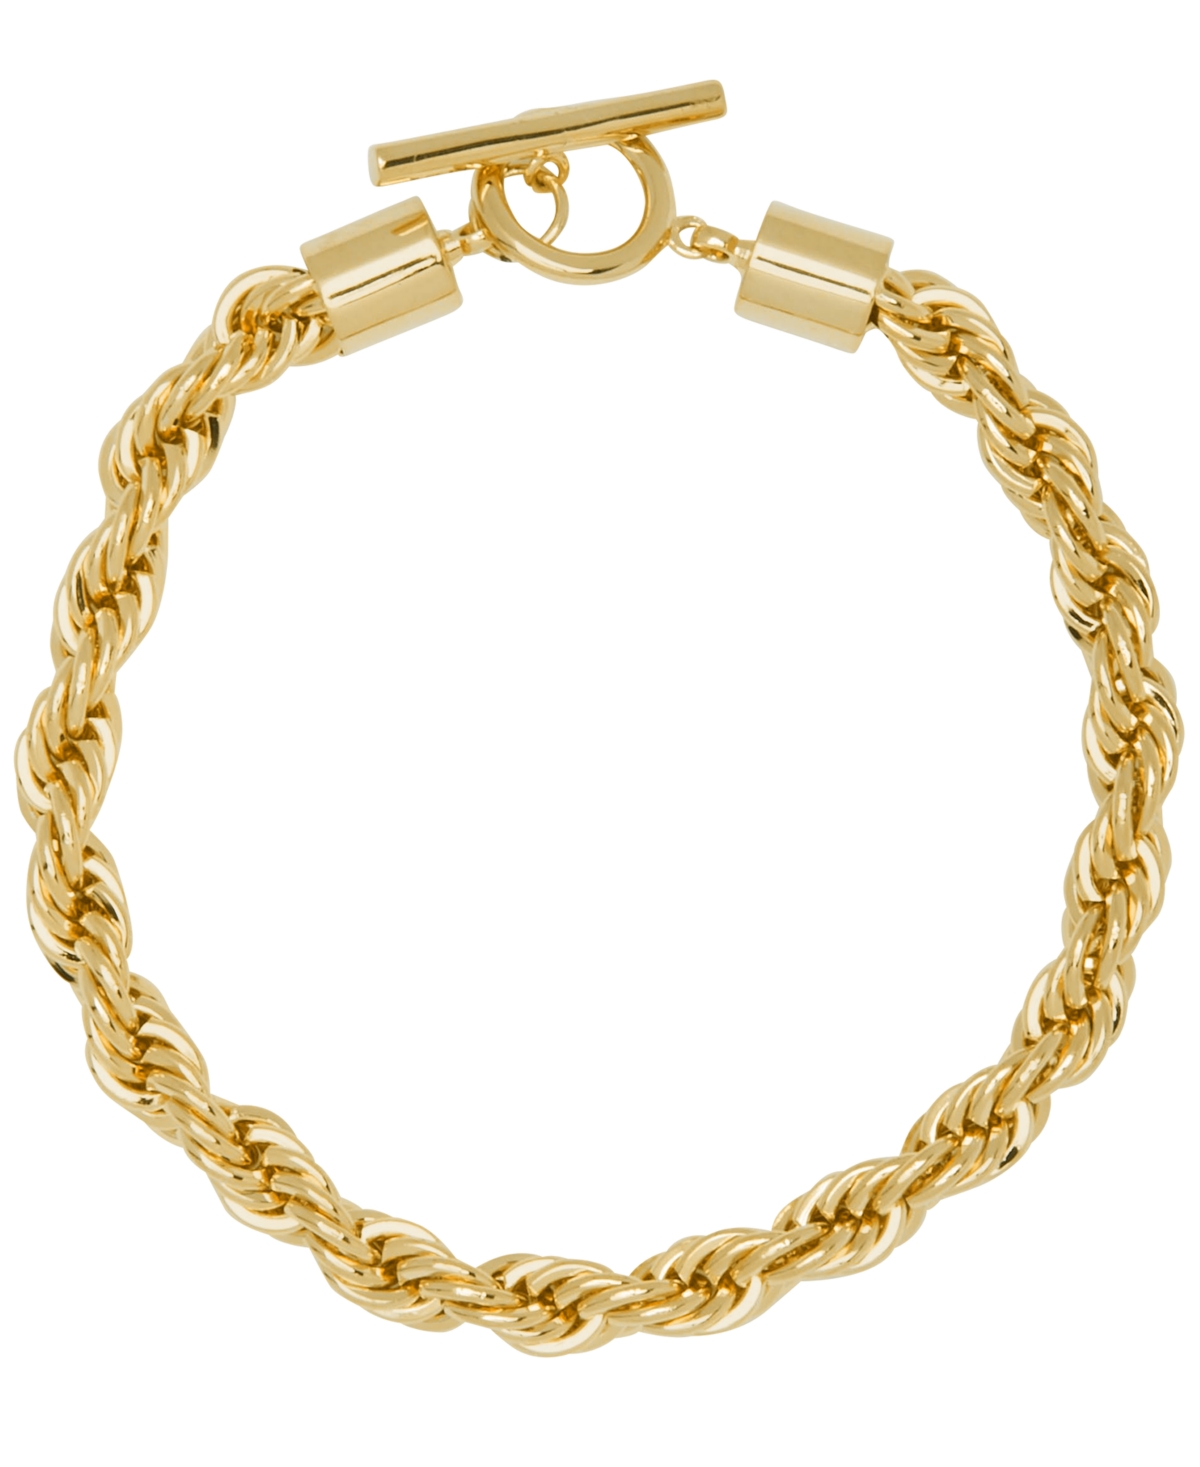 Women's Twisted Rope Bracelet - Gold Plated